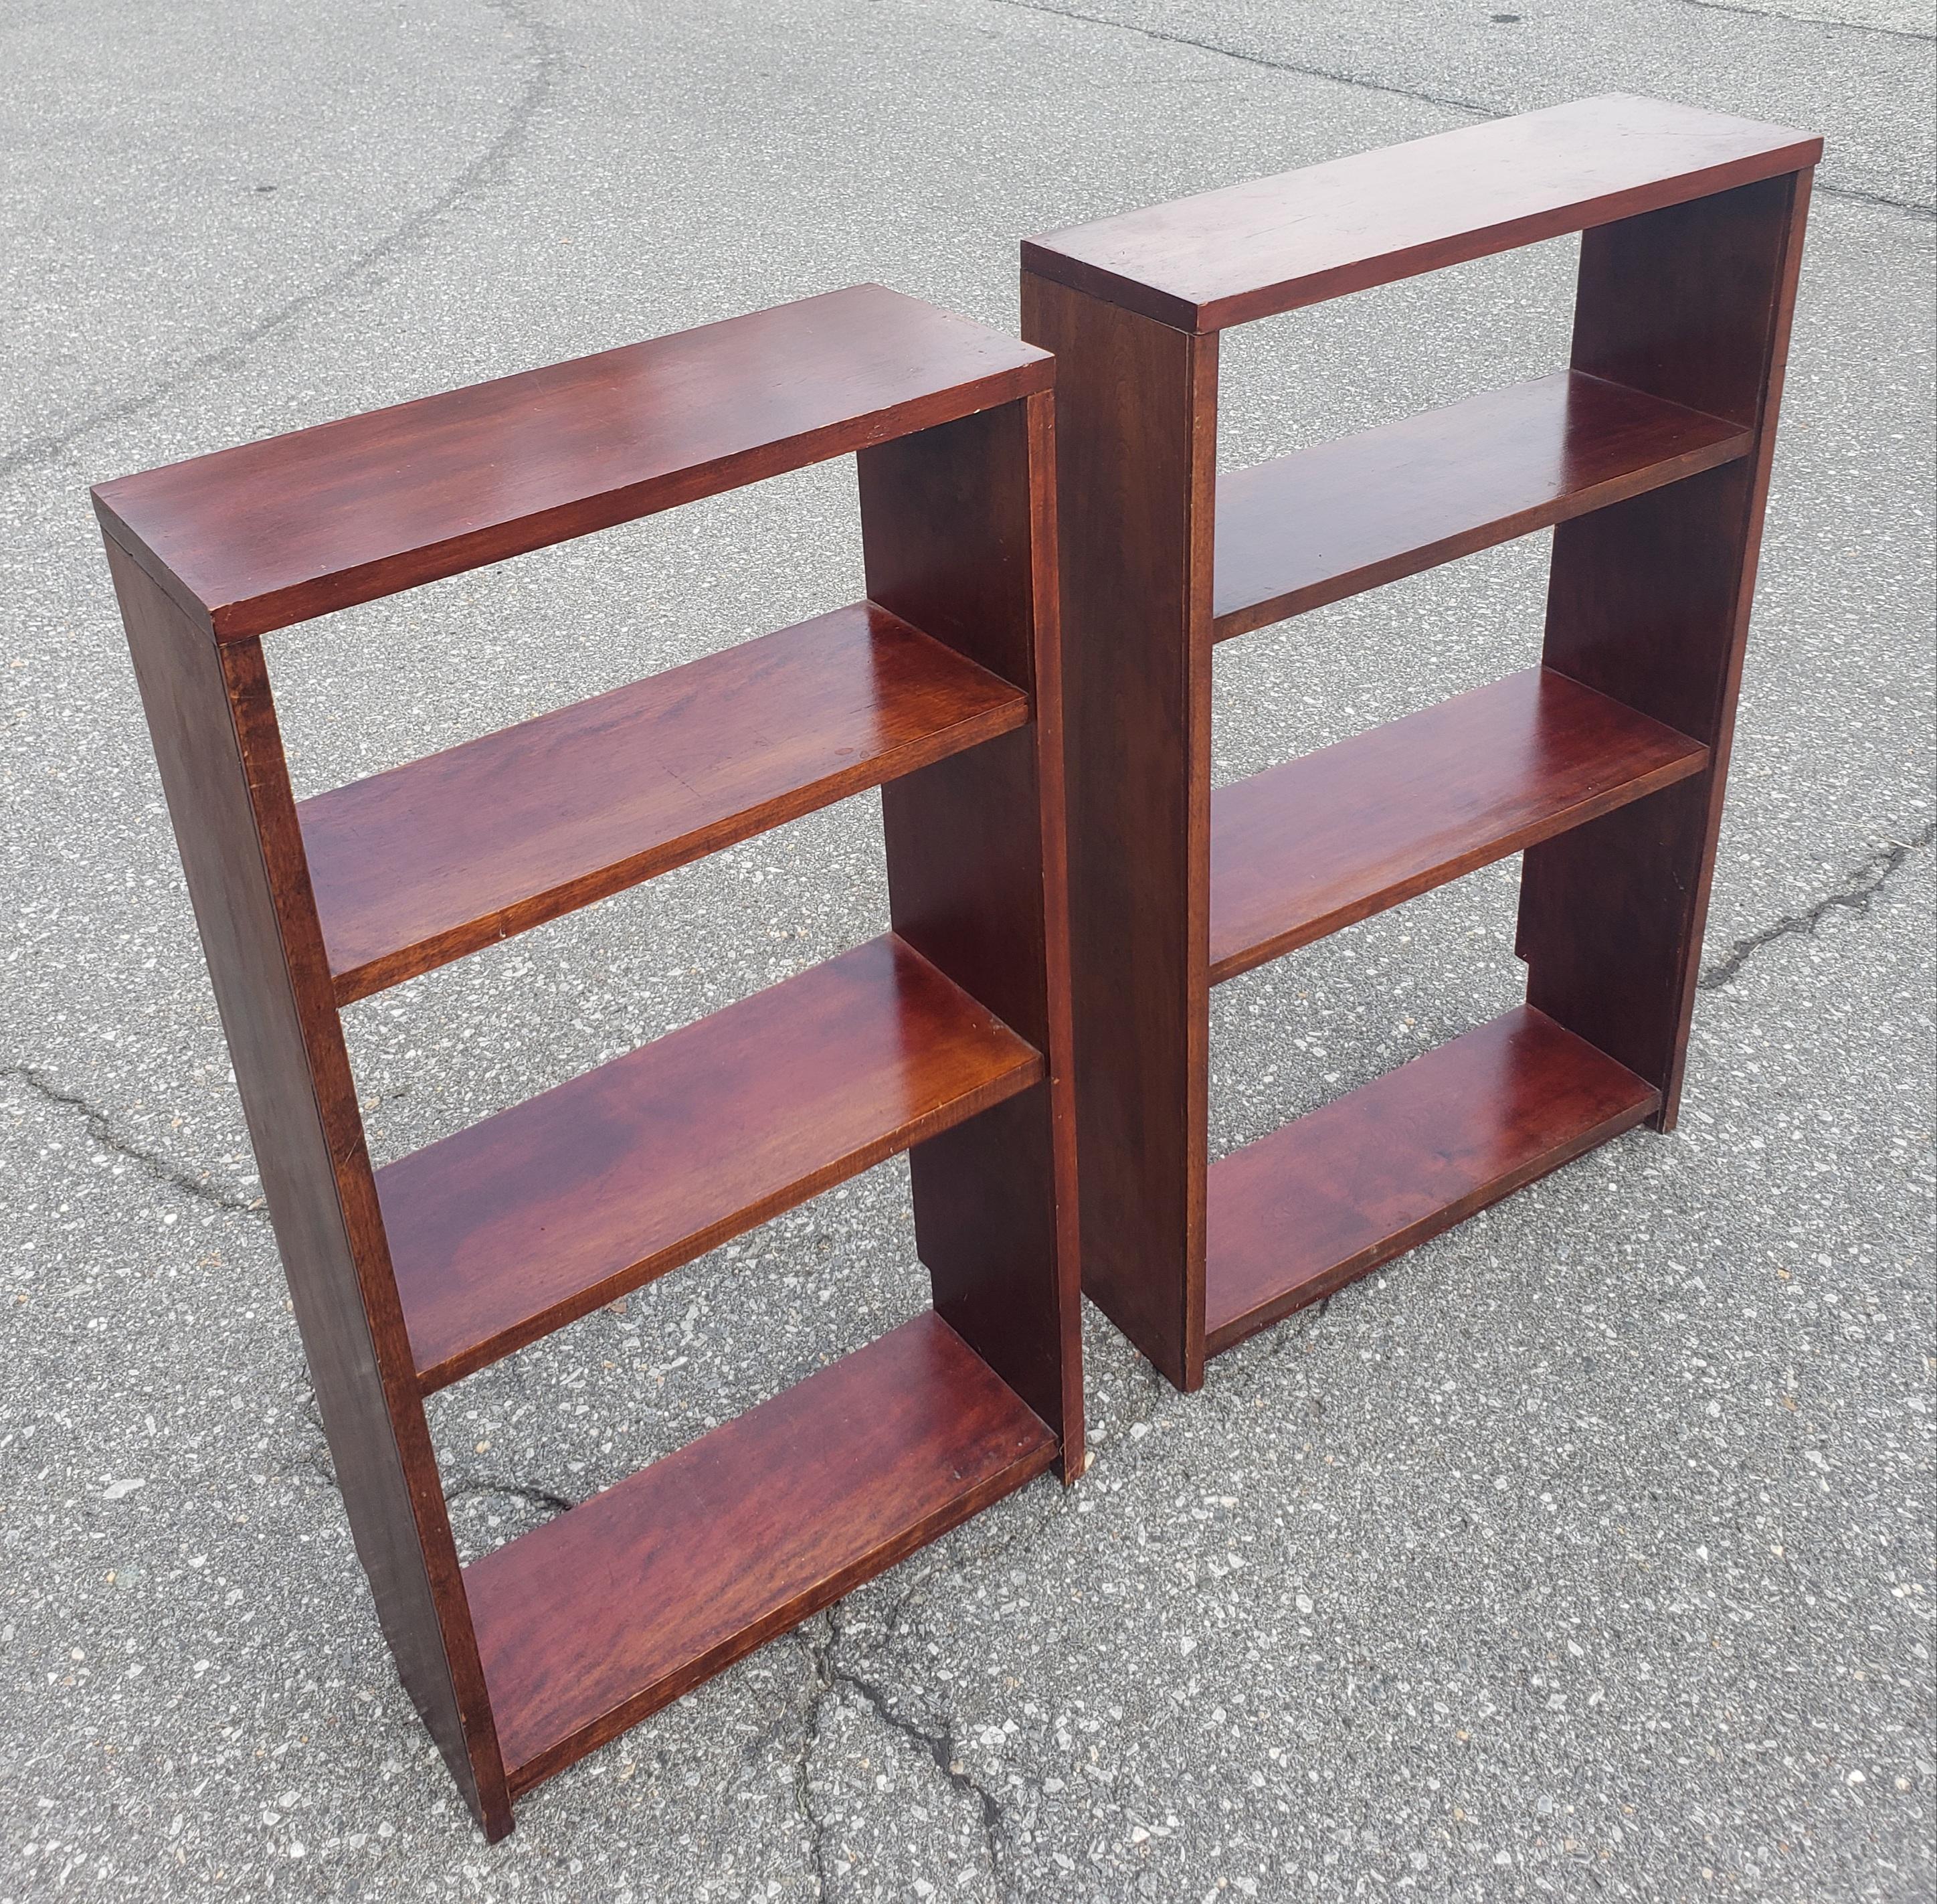 Pair of Medium Size Solid Cherry Open Bookcases In Good Condition For Sale In Germantown, MD